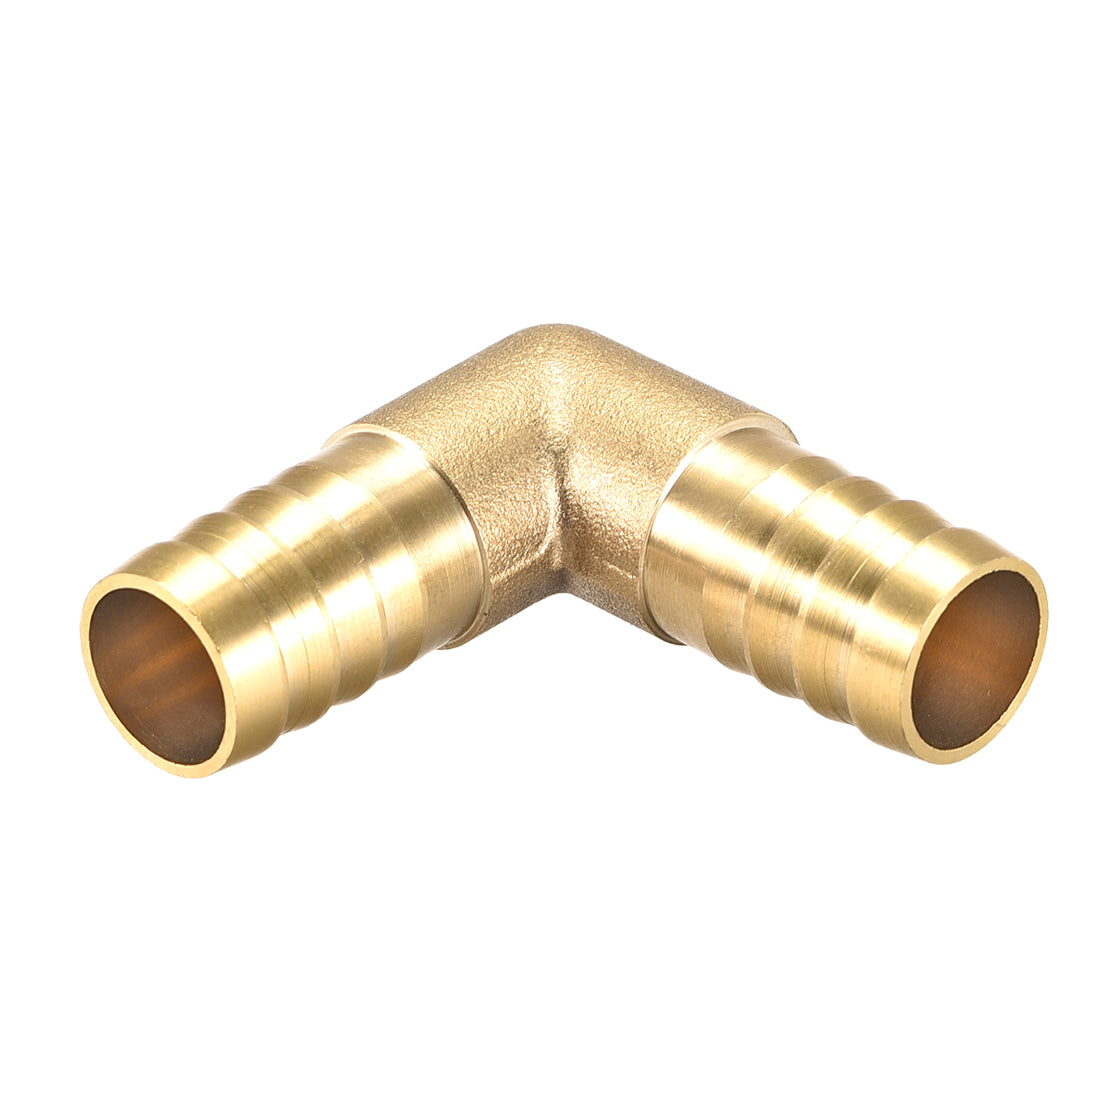 Uxcell Uxcell 12mm Barb Brass Hose Fitting 90 Degree Elbow Pipe Connector Coupler Tubing